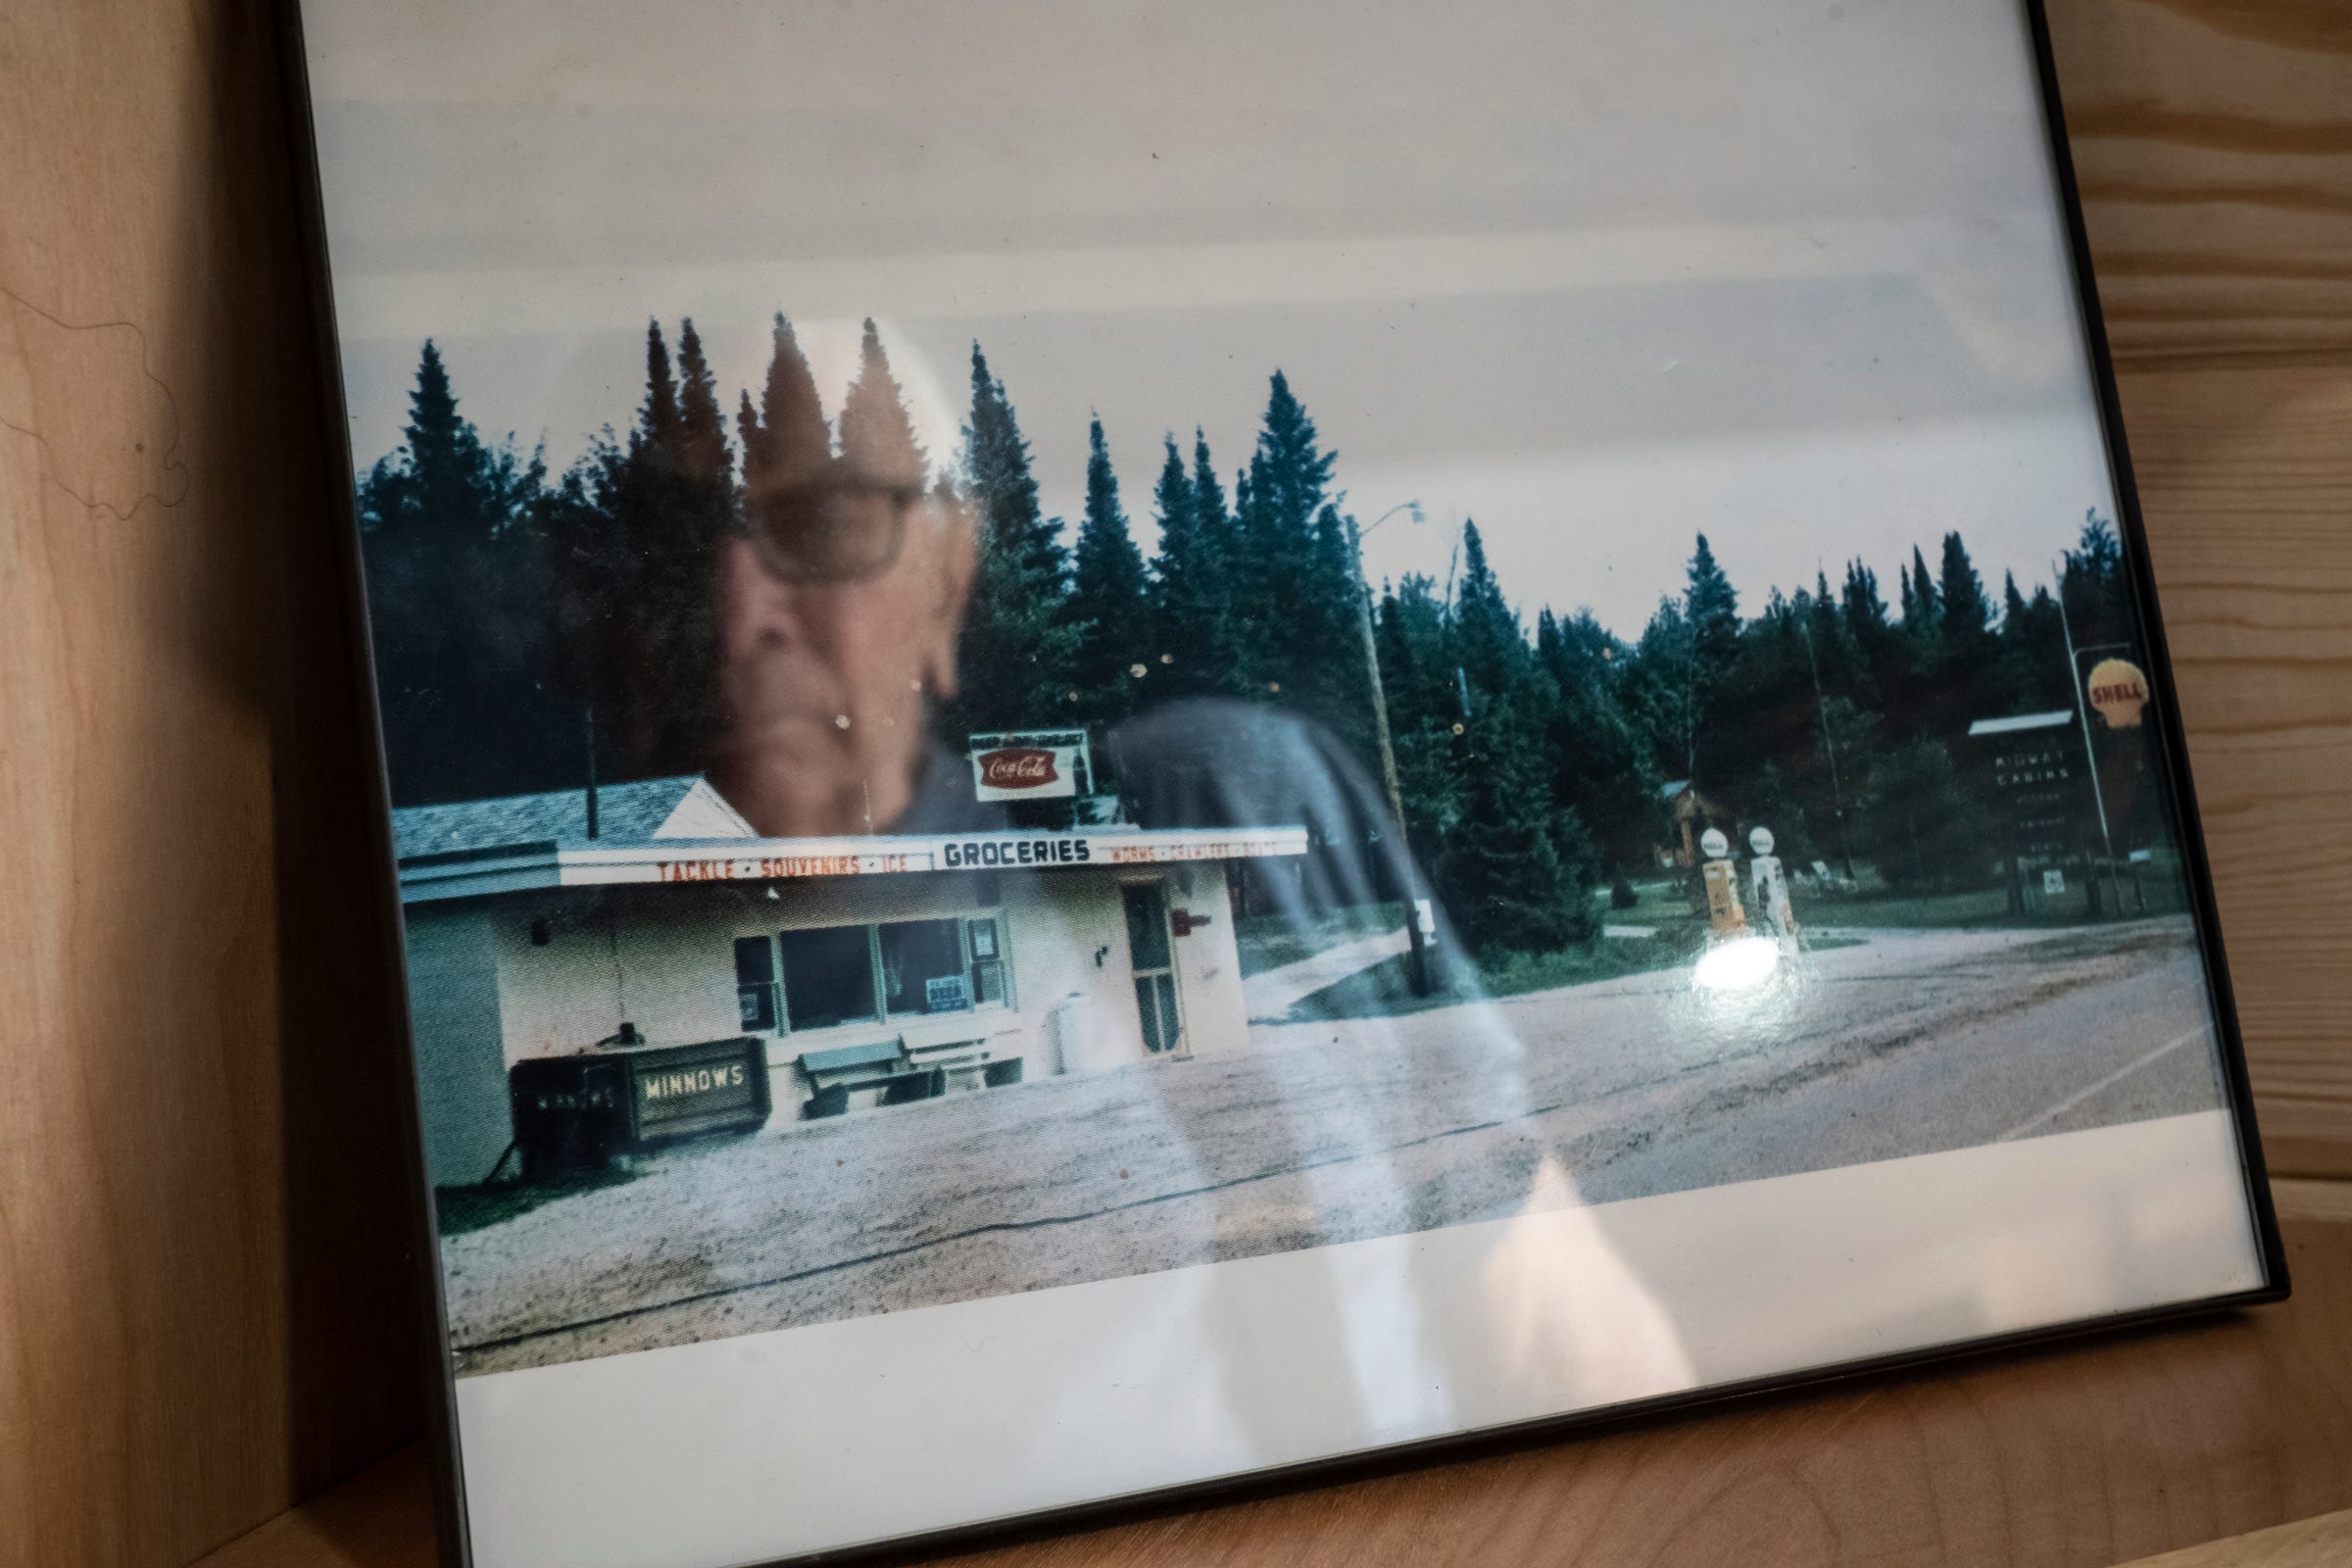 Mailman Ron Curtis, 86, of Wetmore looks at a photo of the Midway General Store he once owned and renovated as he visits the store, which is under new ownership, on Wednesday, July 27, 2022.